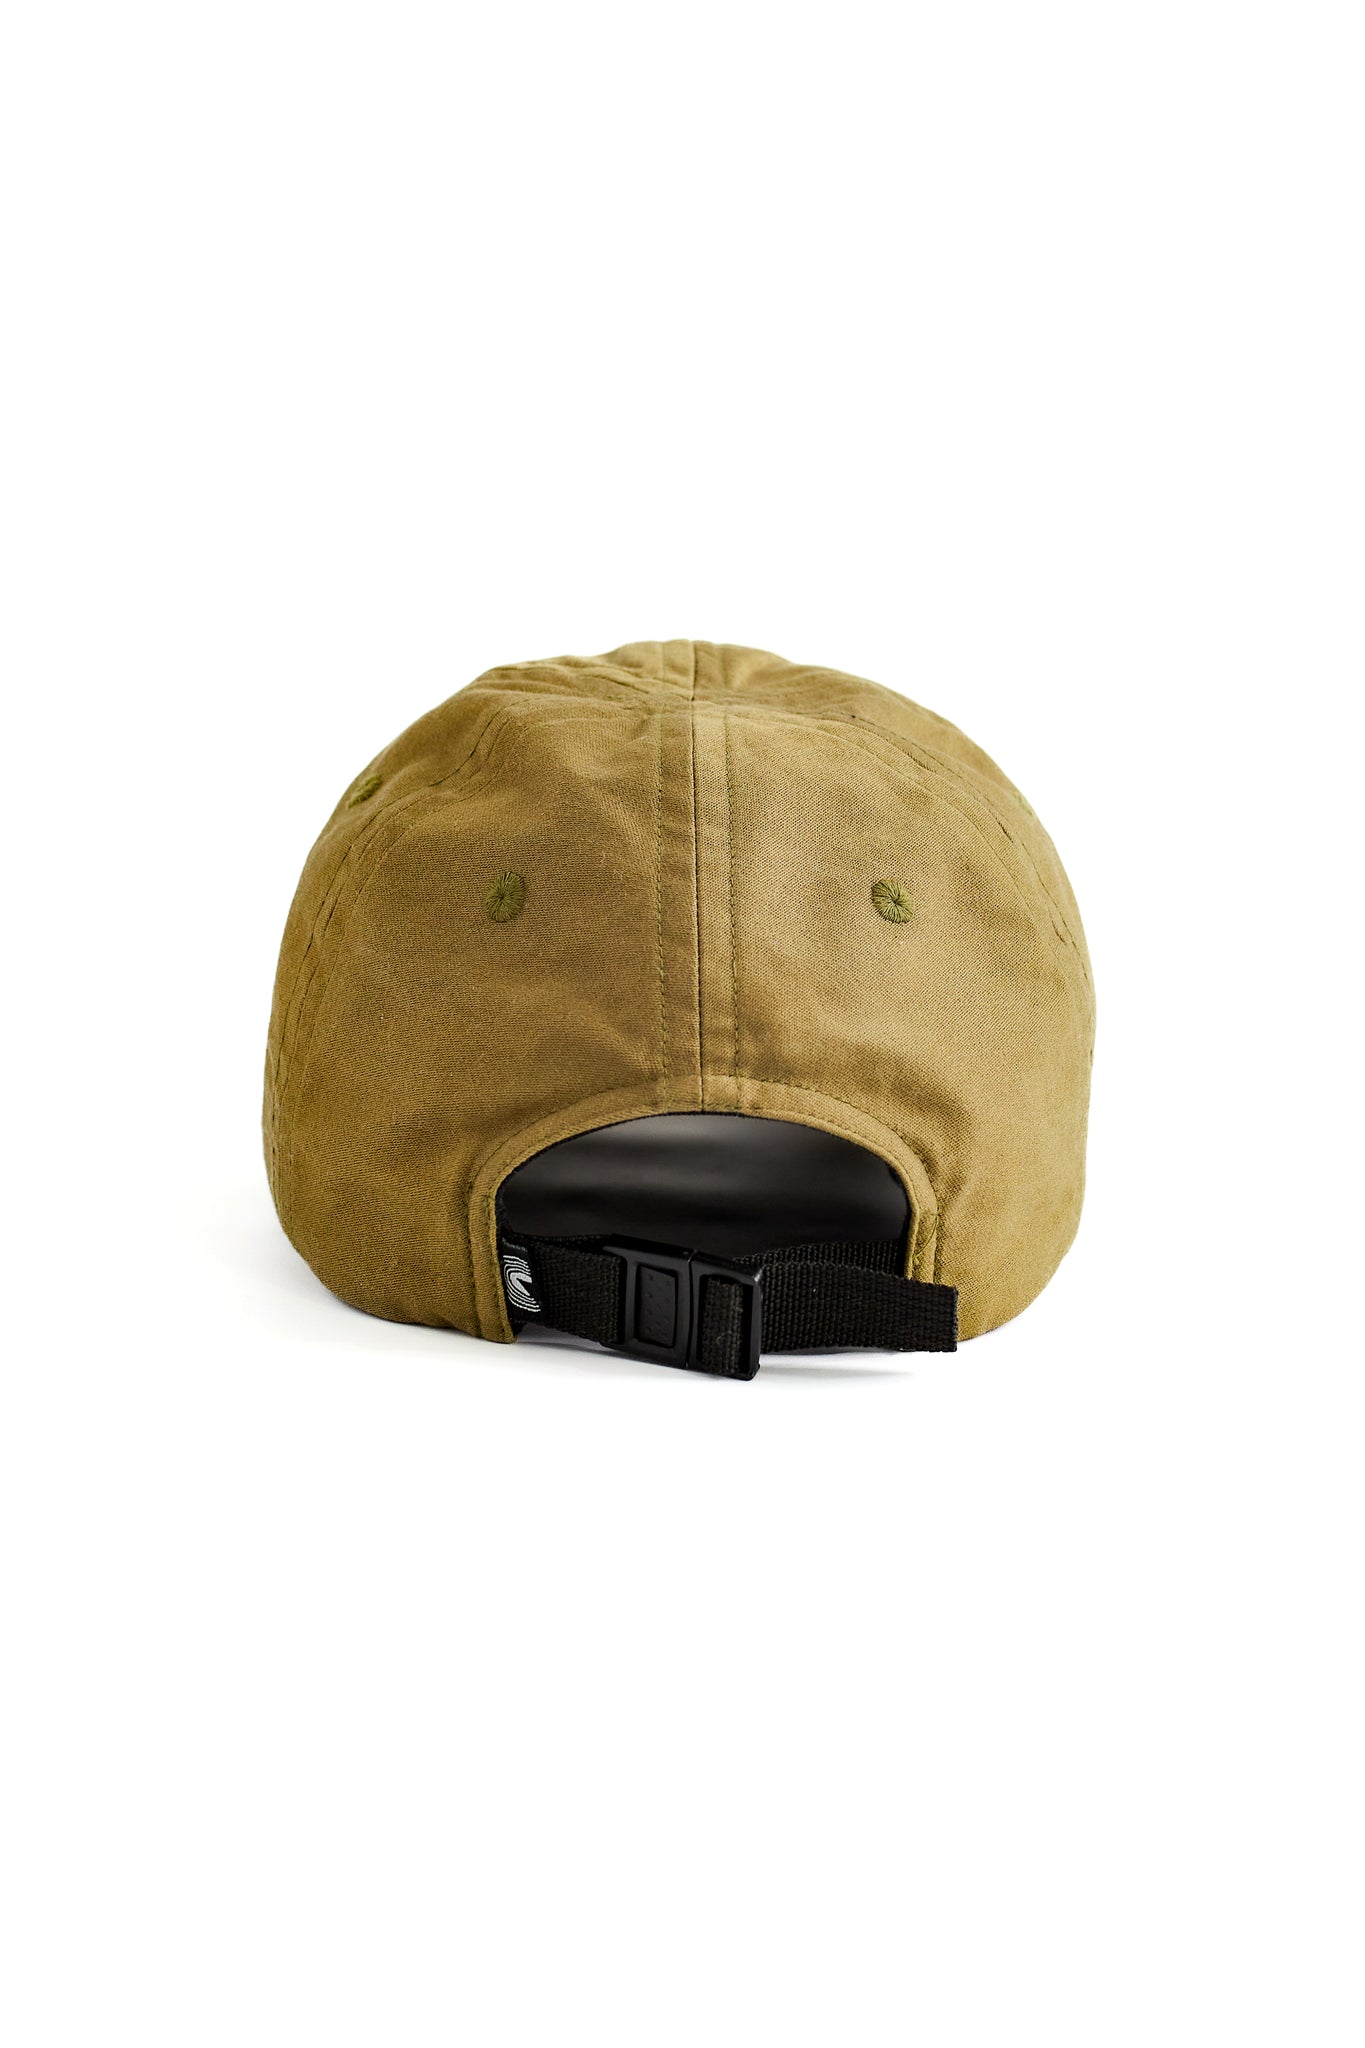 HAND-EMBROIDERED MORNING RISER LEDDY SIX PANEL CAP - ARMY GREEN HEAVYWEIGHT SATEEN